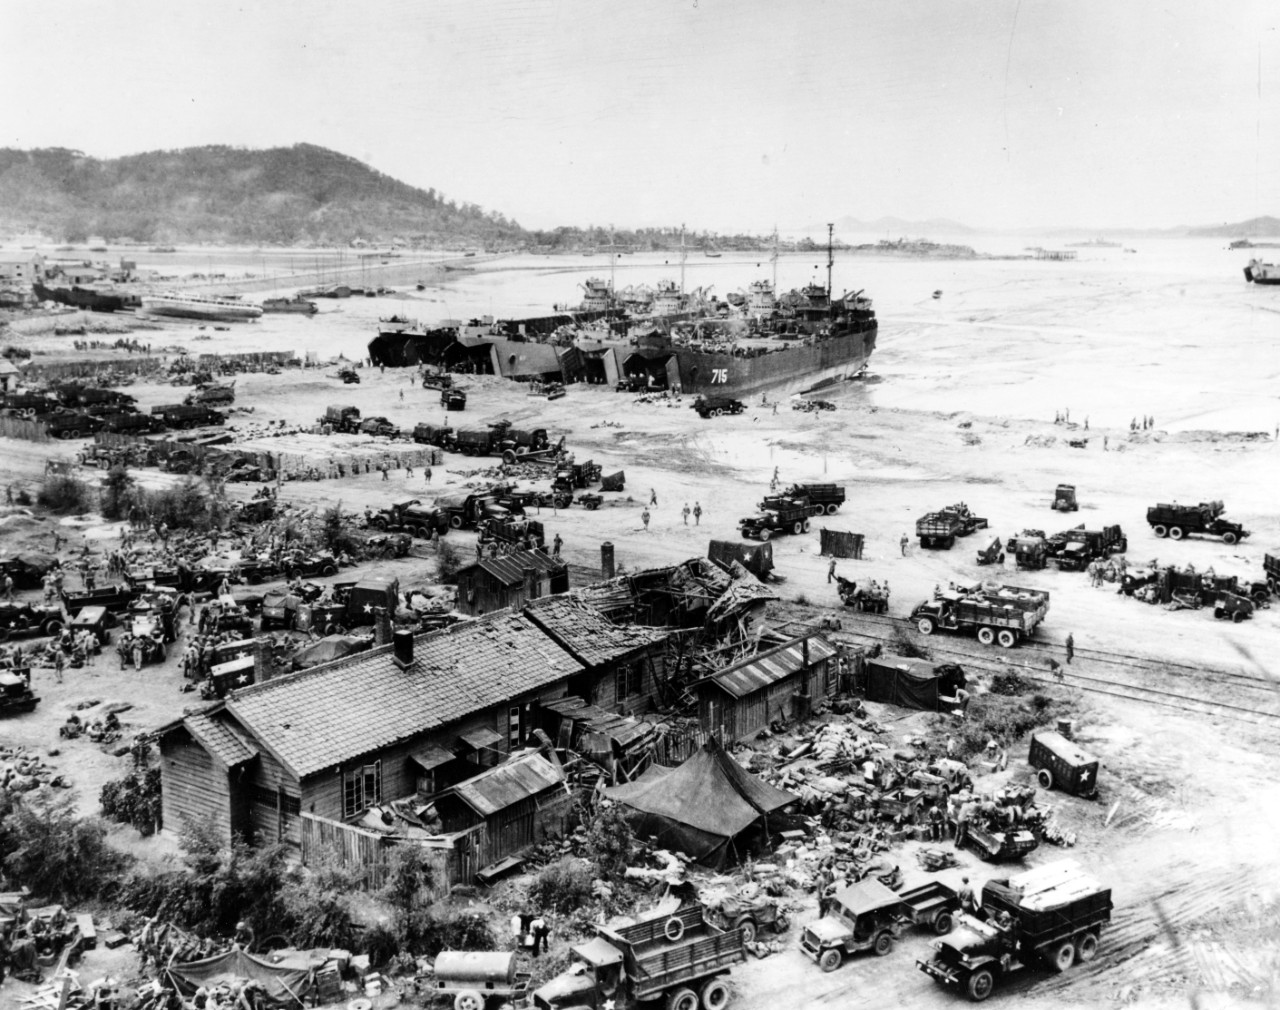 Four LSTs unload men and equipment while high and dry at low tide on Inchon's Red Beach, 16 September 1950, the day after the initial landings there.